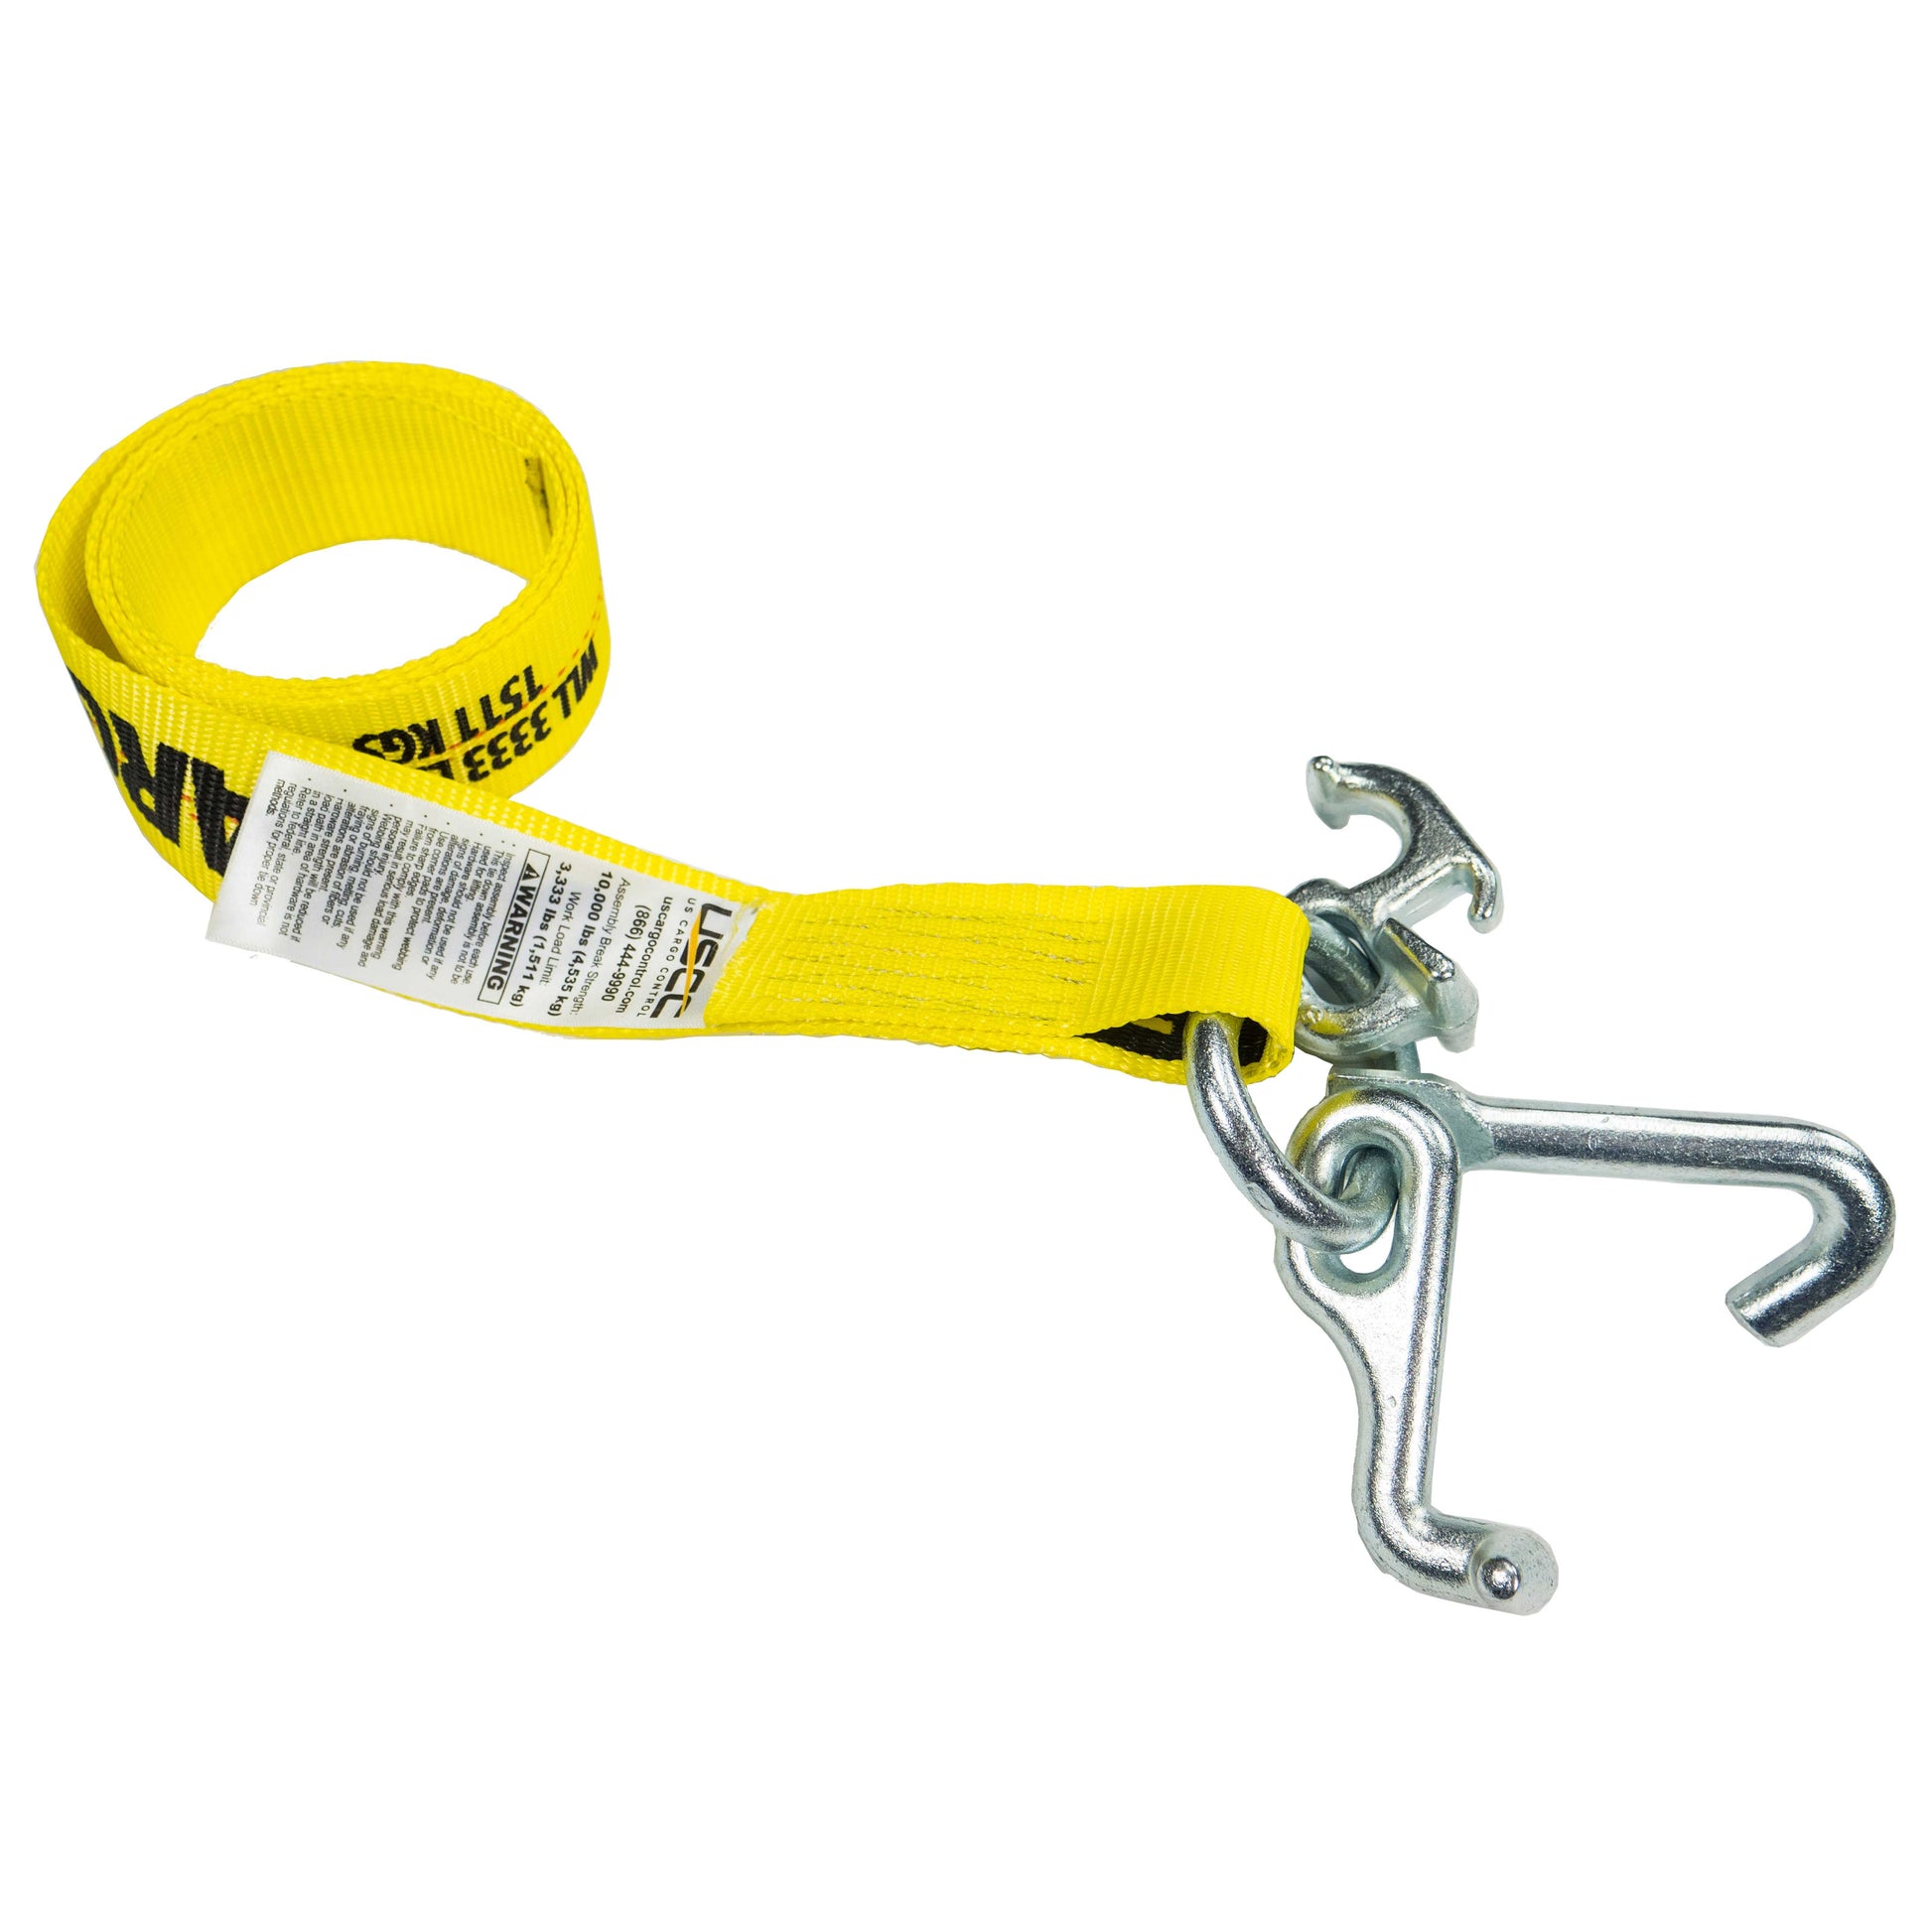 2 inch x 10 foot Replacement Strap with RTJ Cluster Hook image 1 of 8